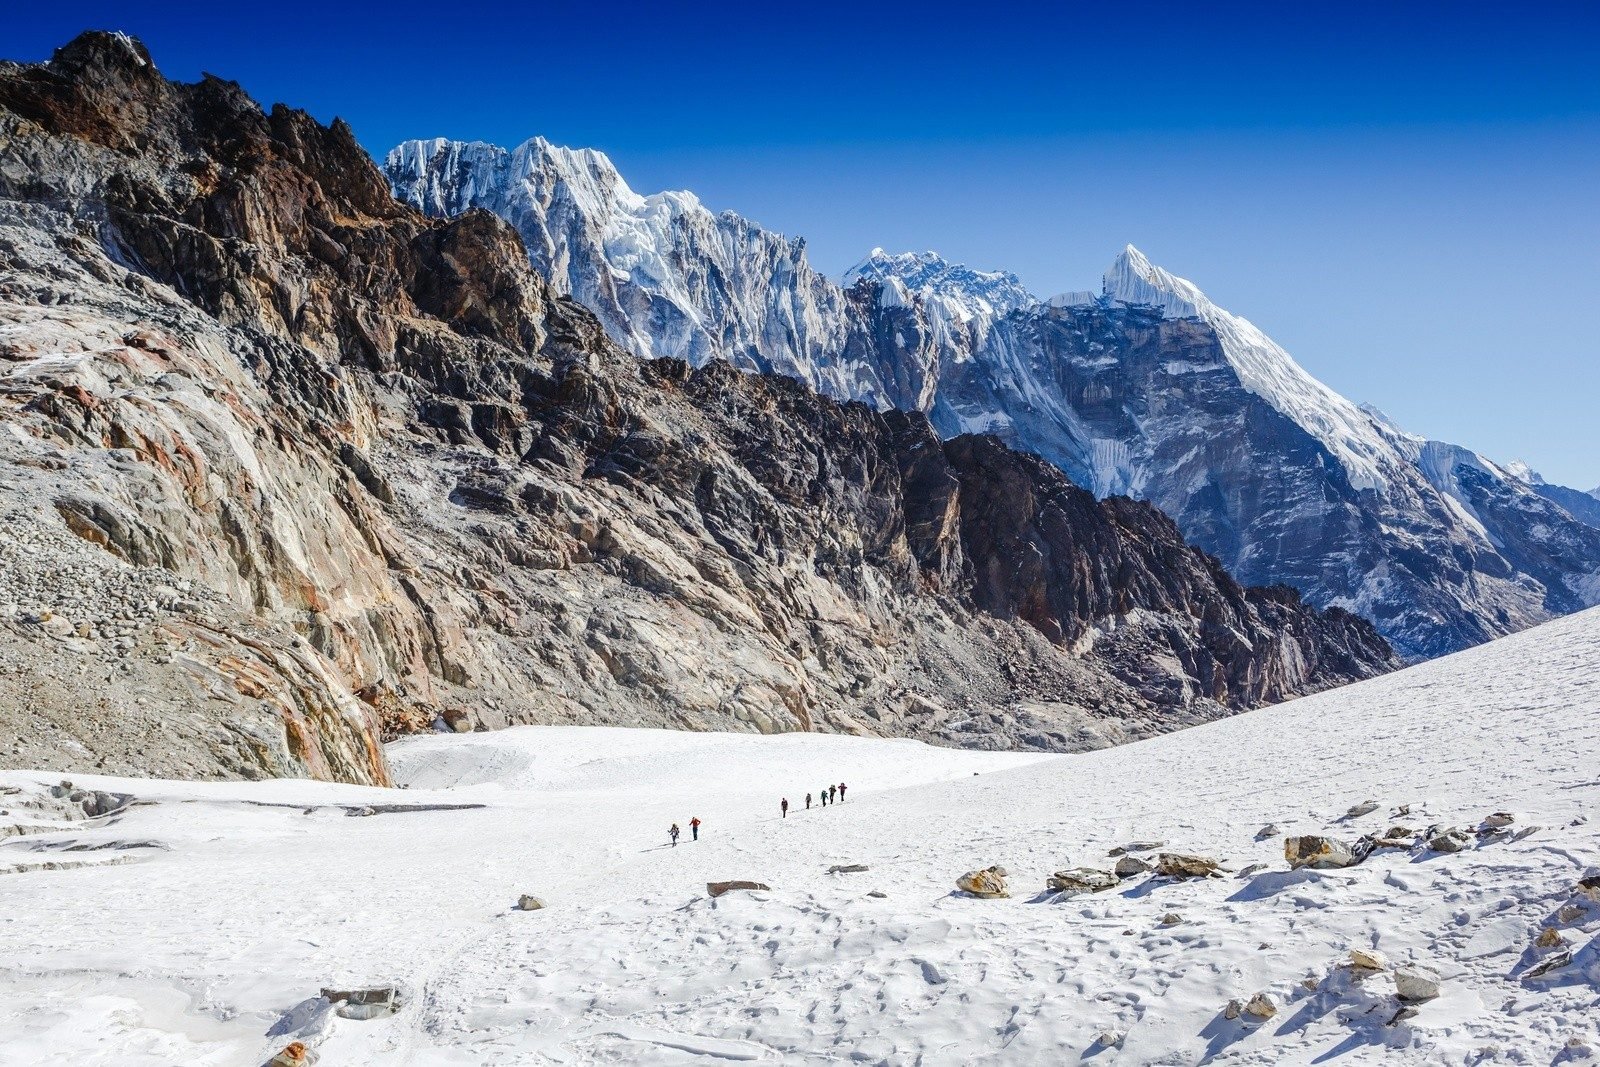 A group of hikers in the Himalayas, tackling the Everest 3 Pass Challenge.